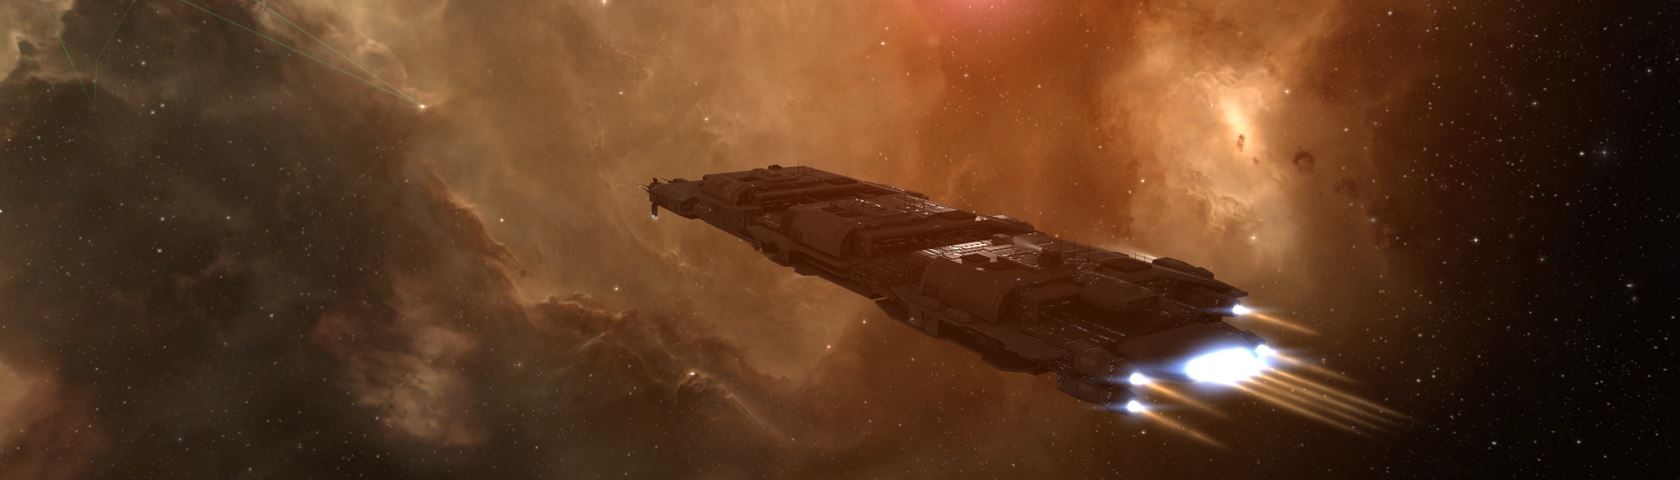 Eve Online Charon Image Wallpaperfusion By Binary Fortress